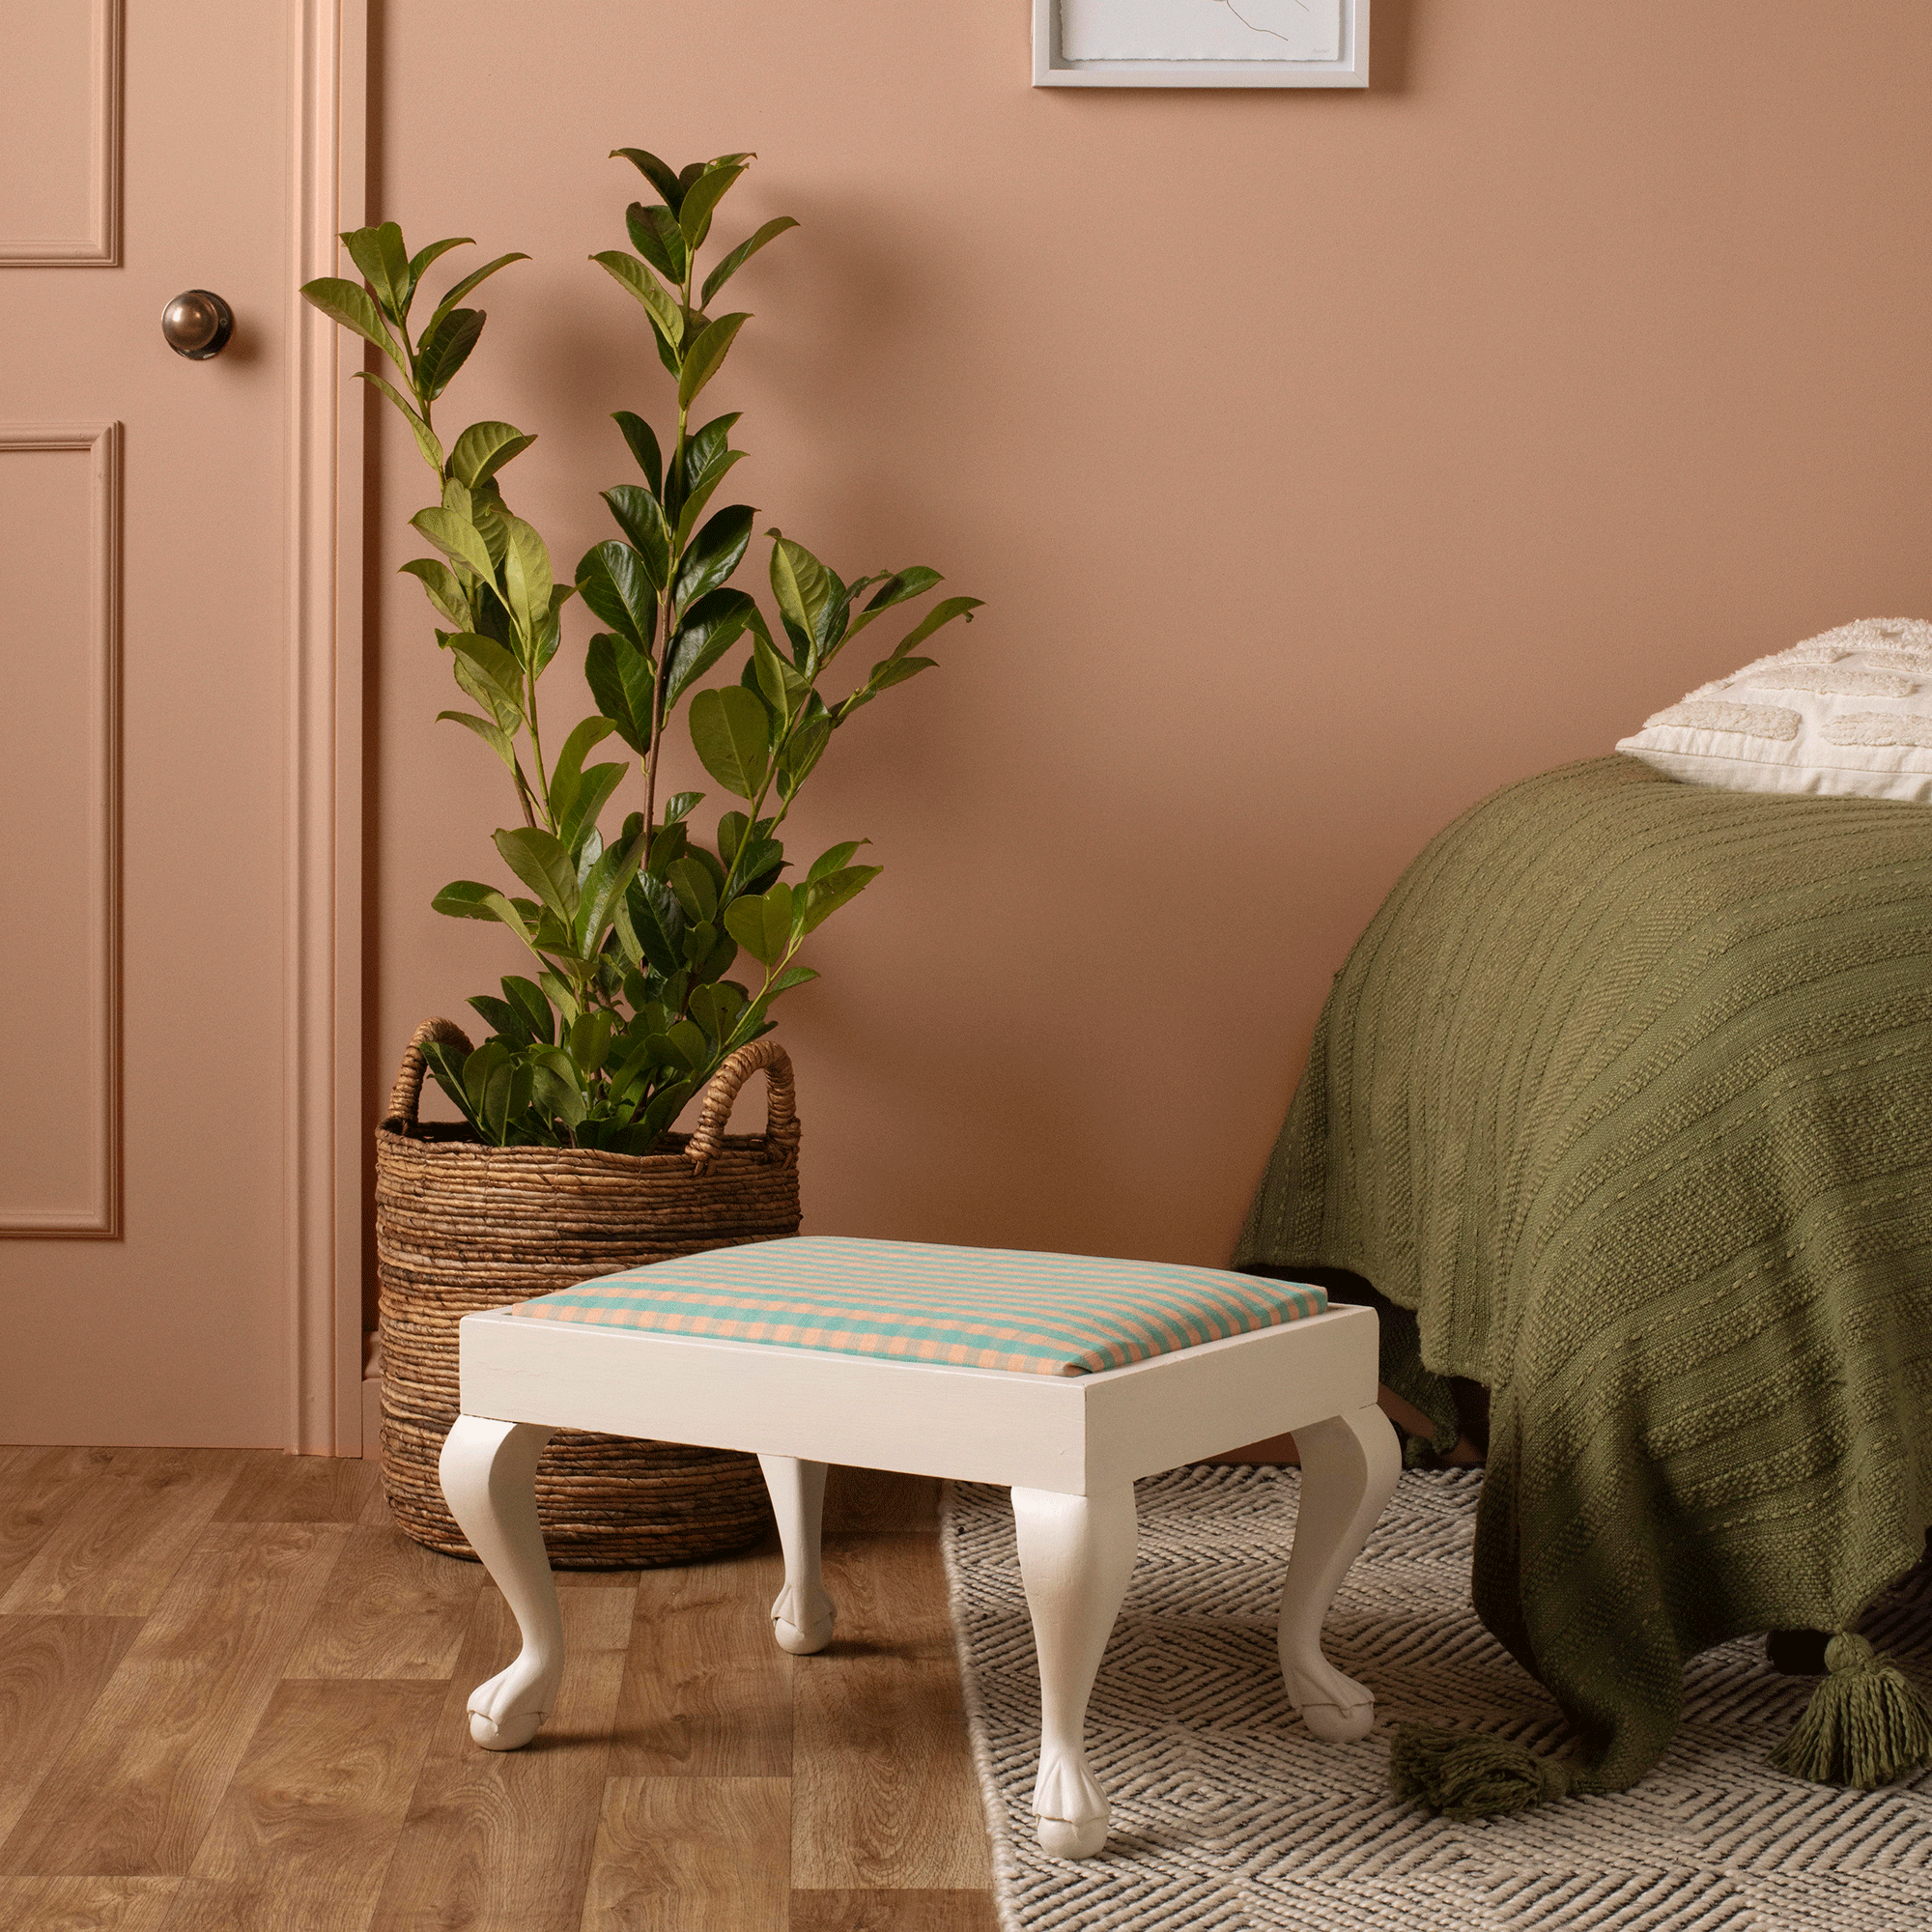 White stool in pink room